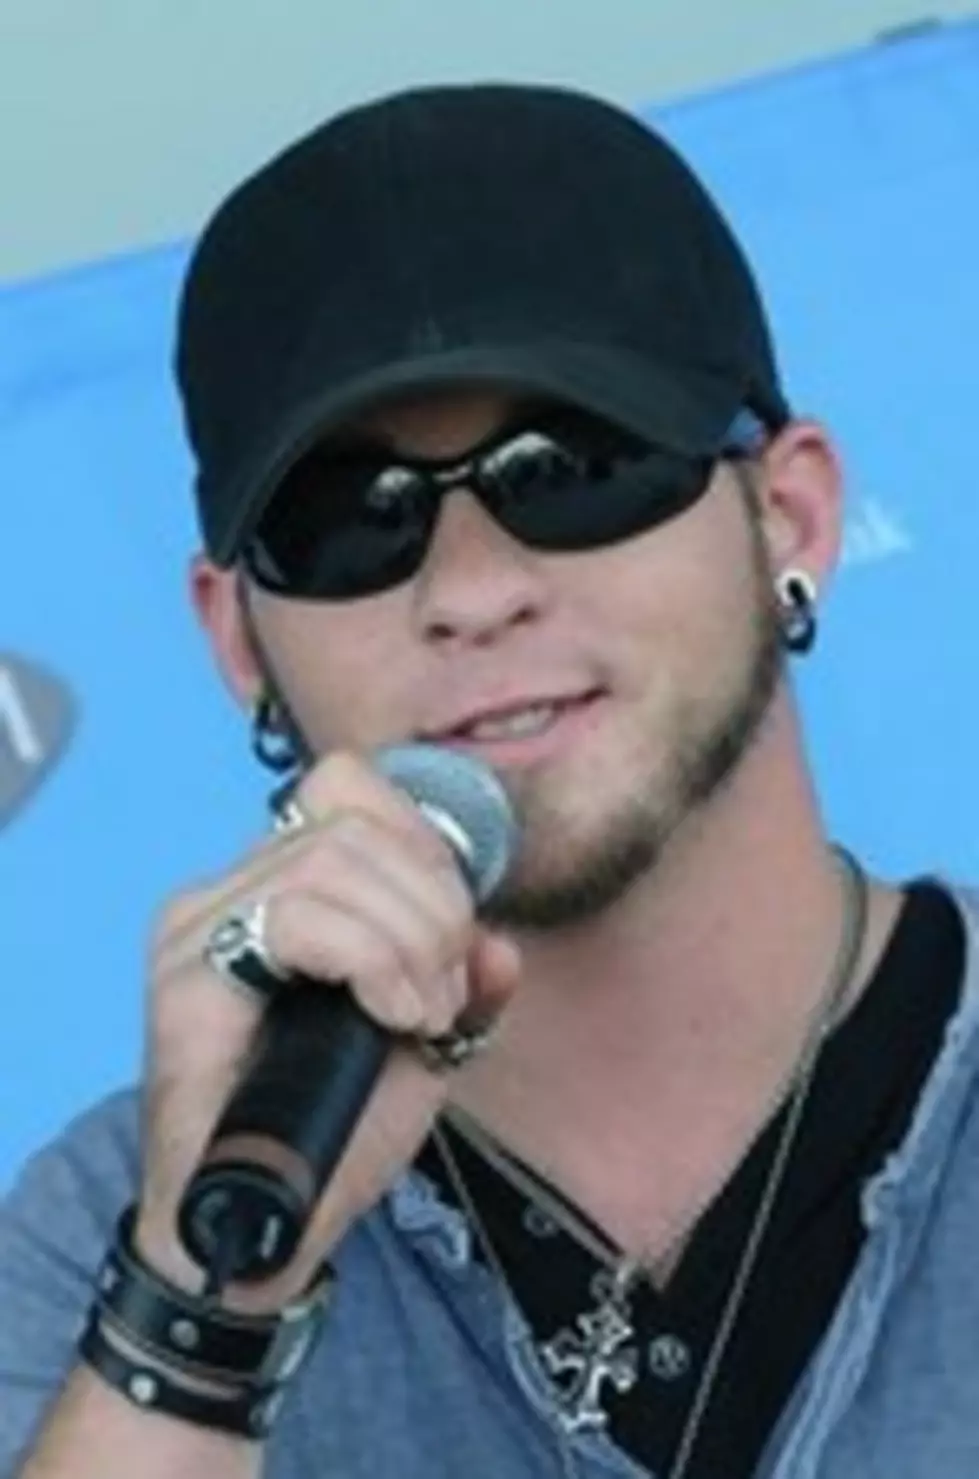 BRANTLEY GILBERT RELEASES ALBUM FOR SECOND TIME, DEBUTS AT #2